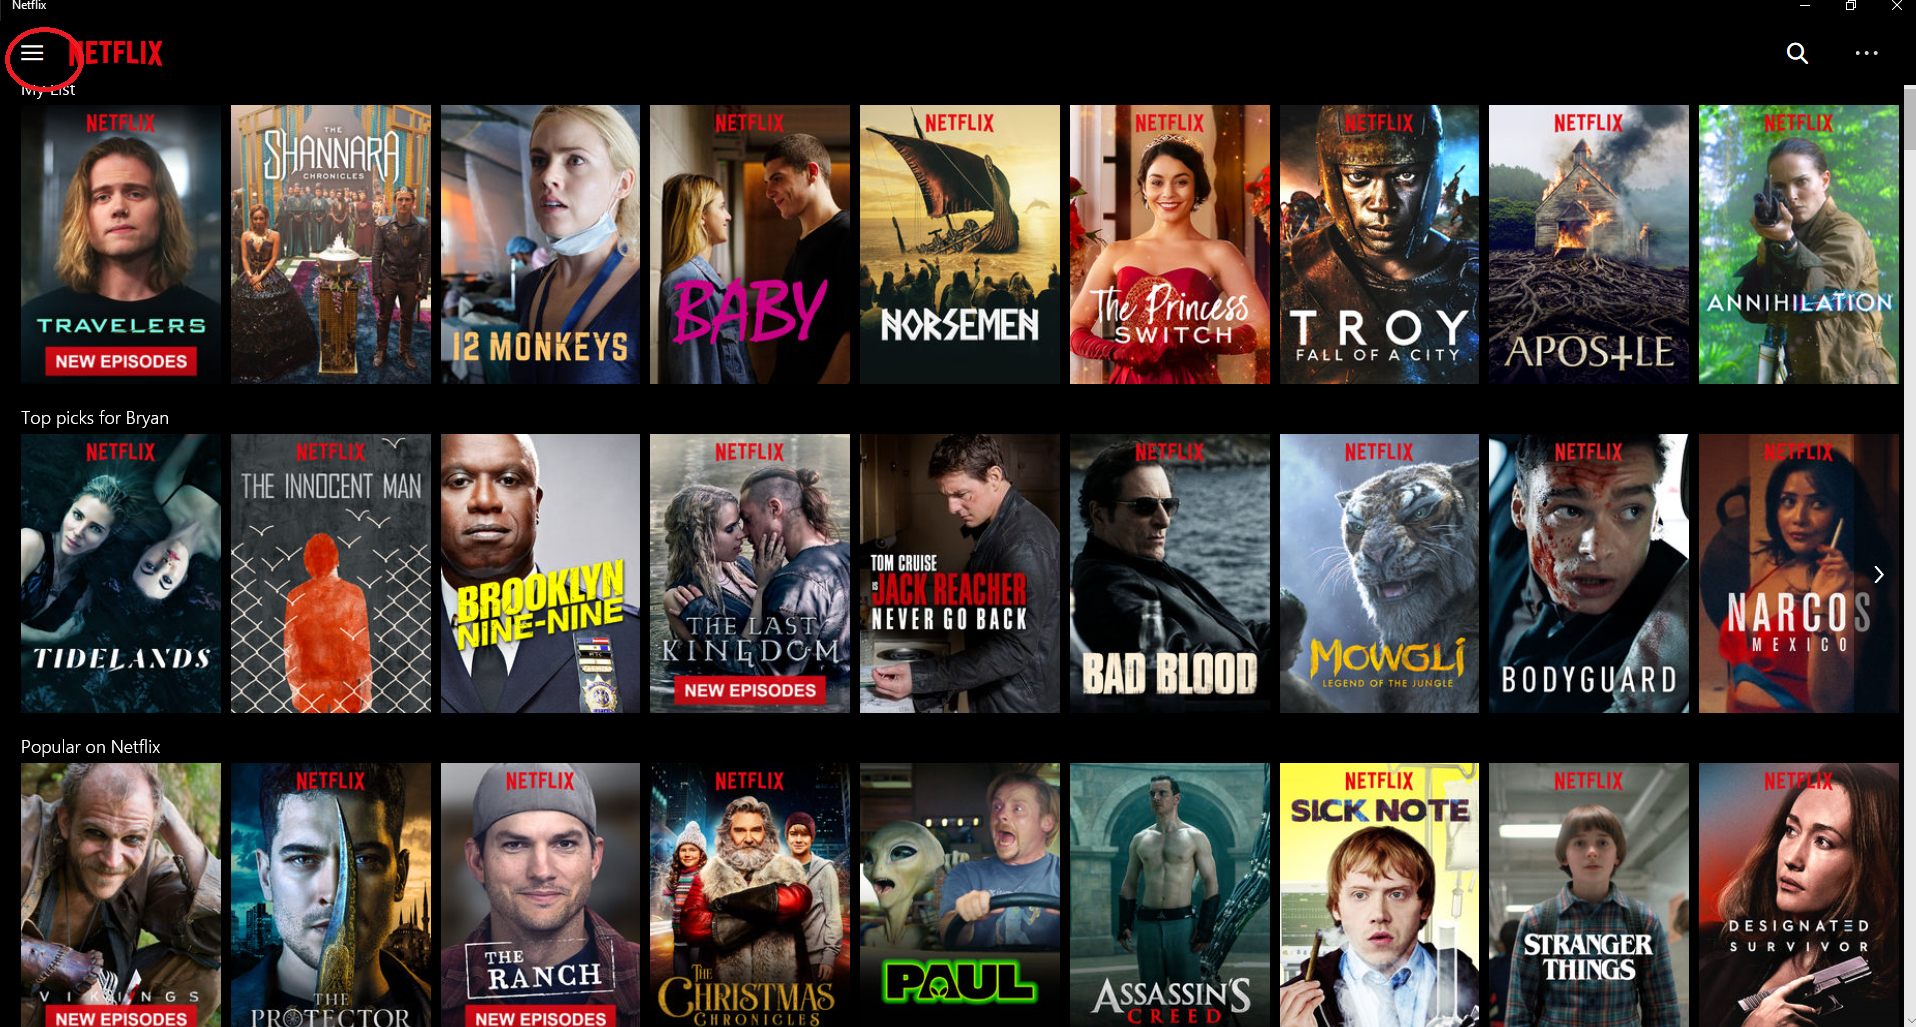 Here’s how to download Netflix videos on Windows 10.